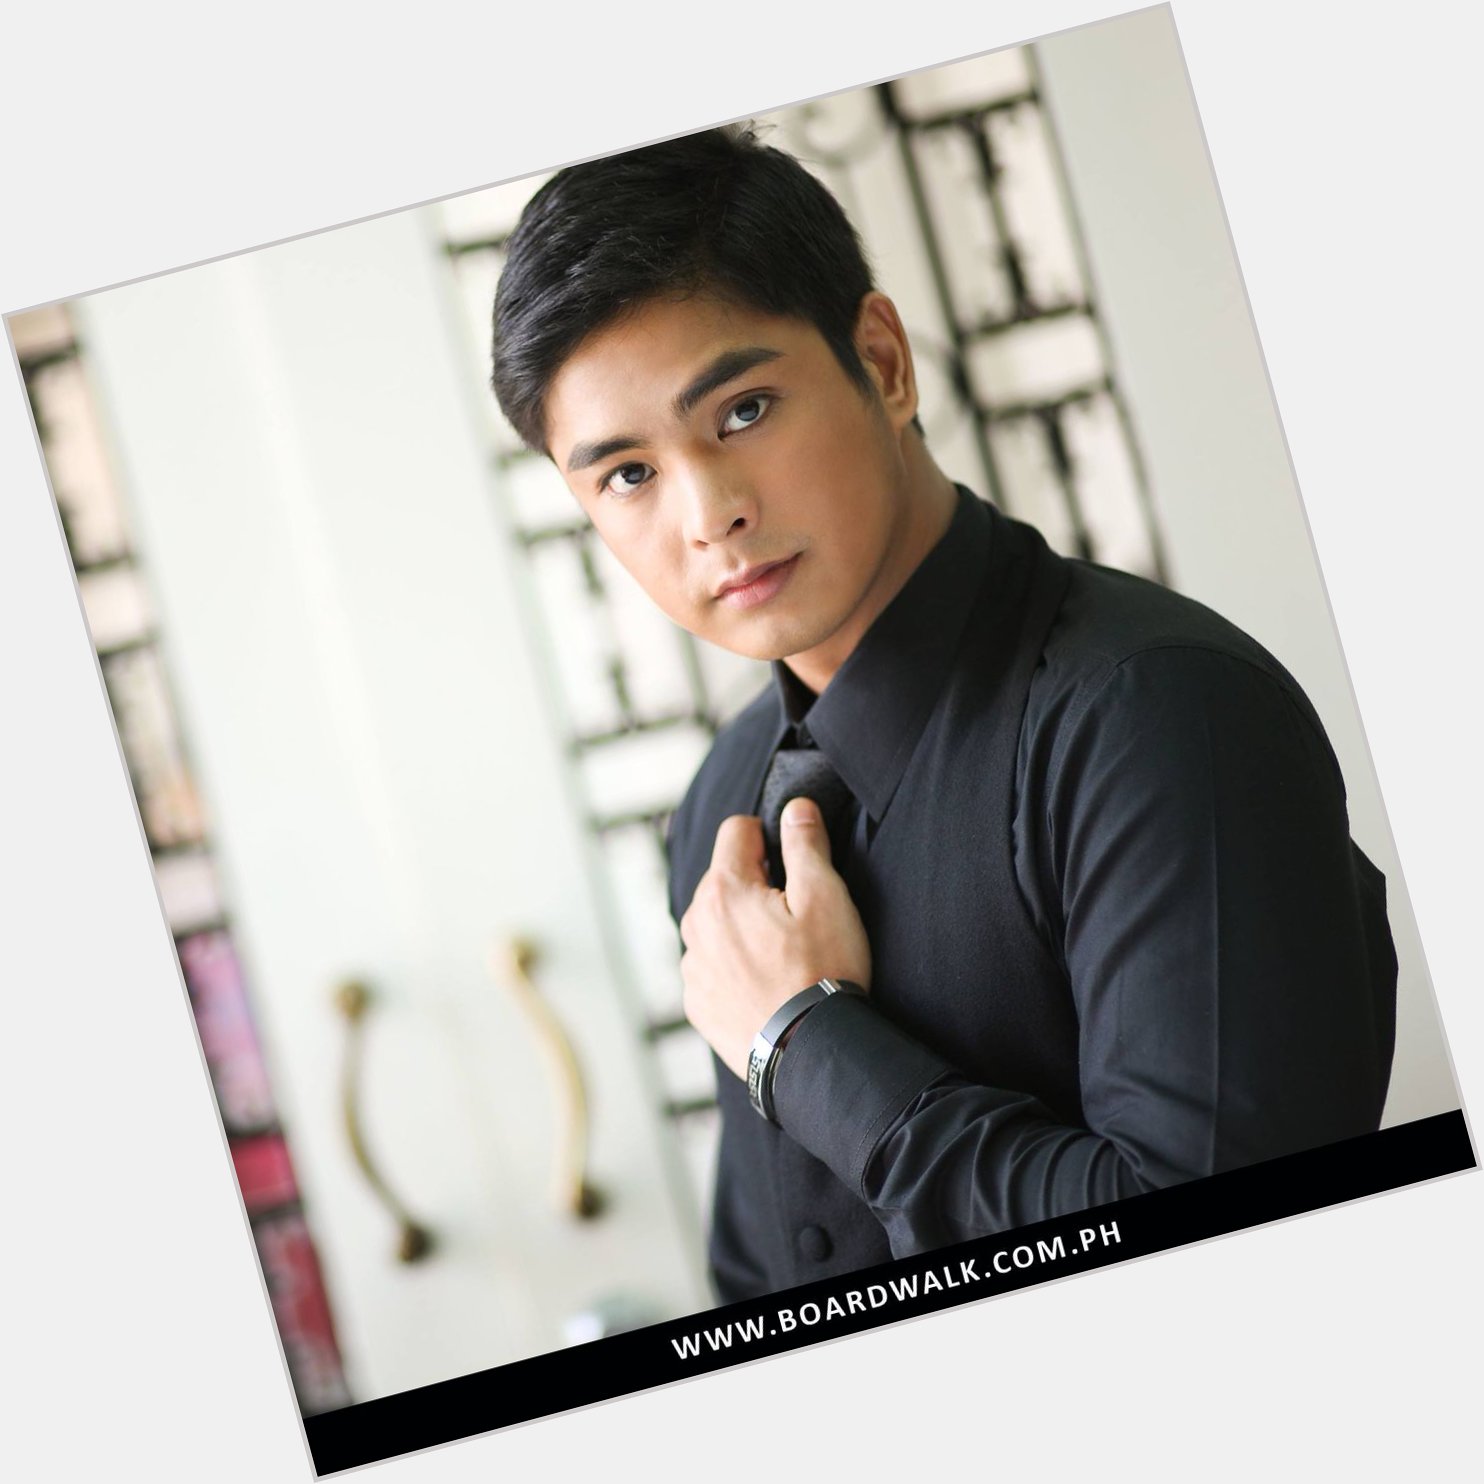 TIME to say HAPPY BIRTHDAY to COCO MARTIN!  